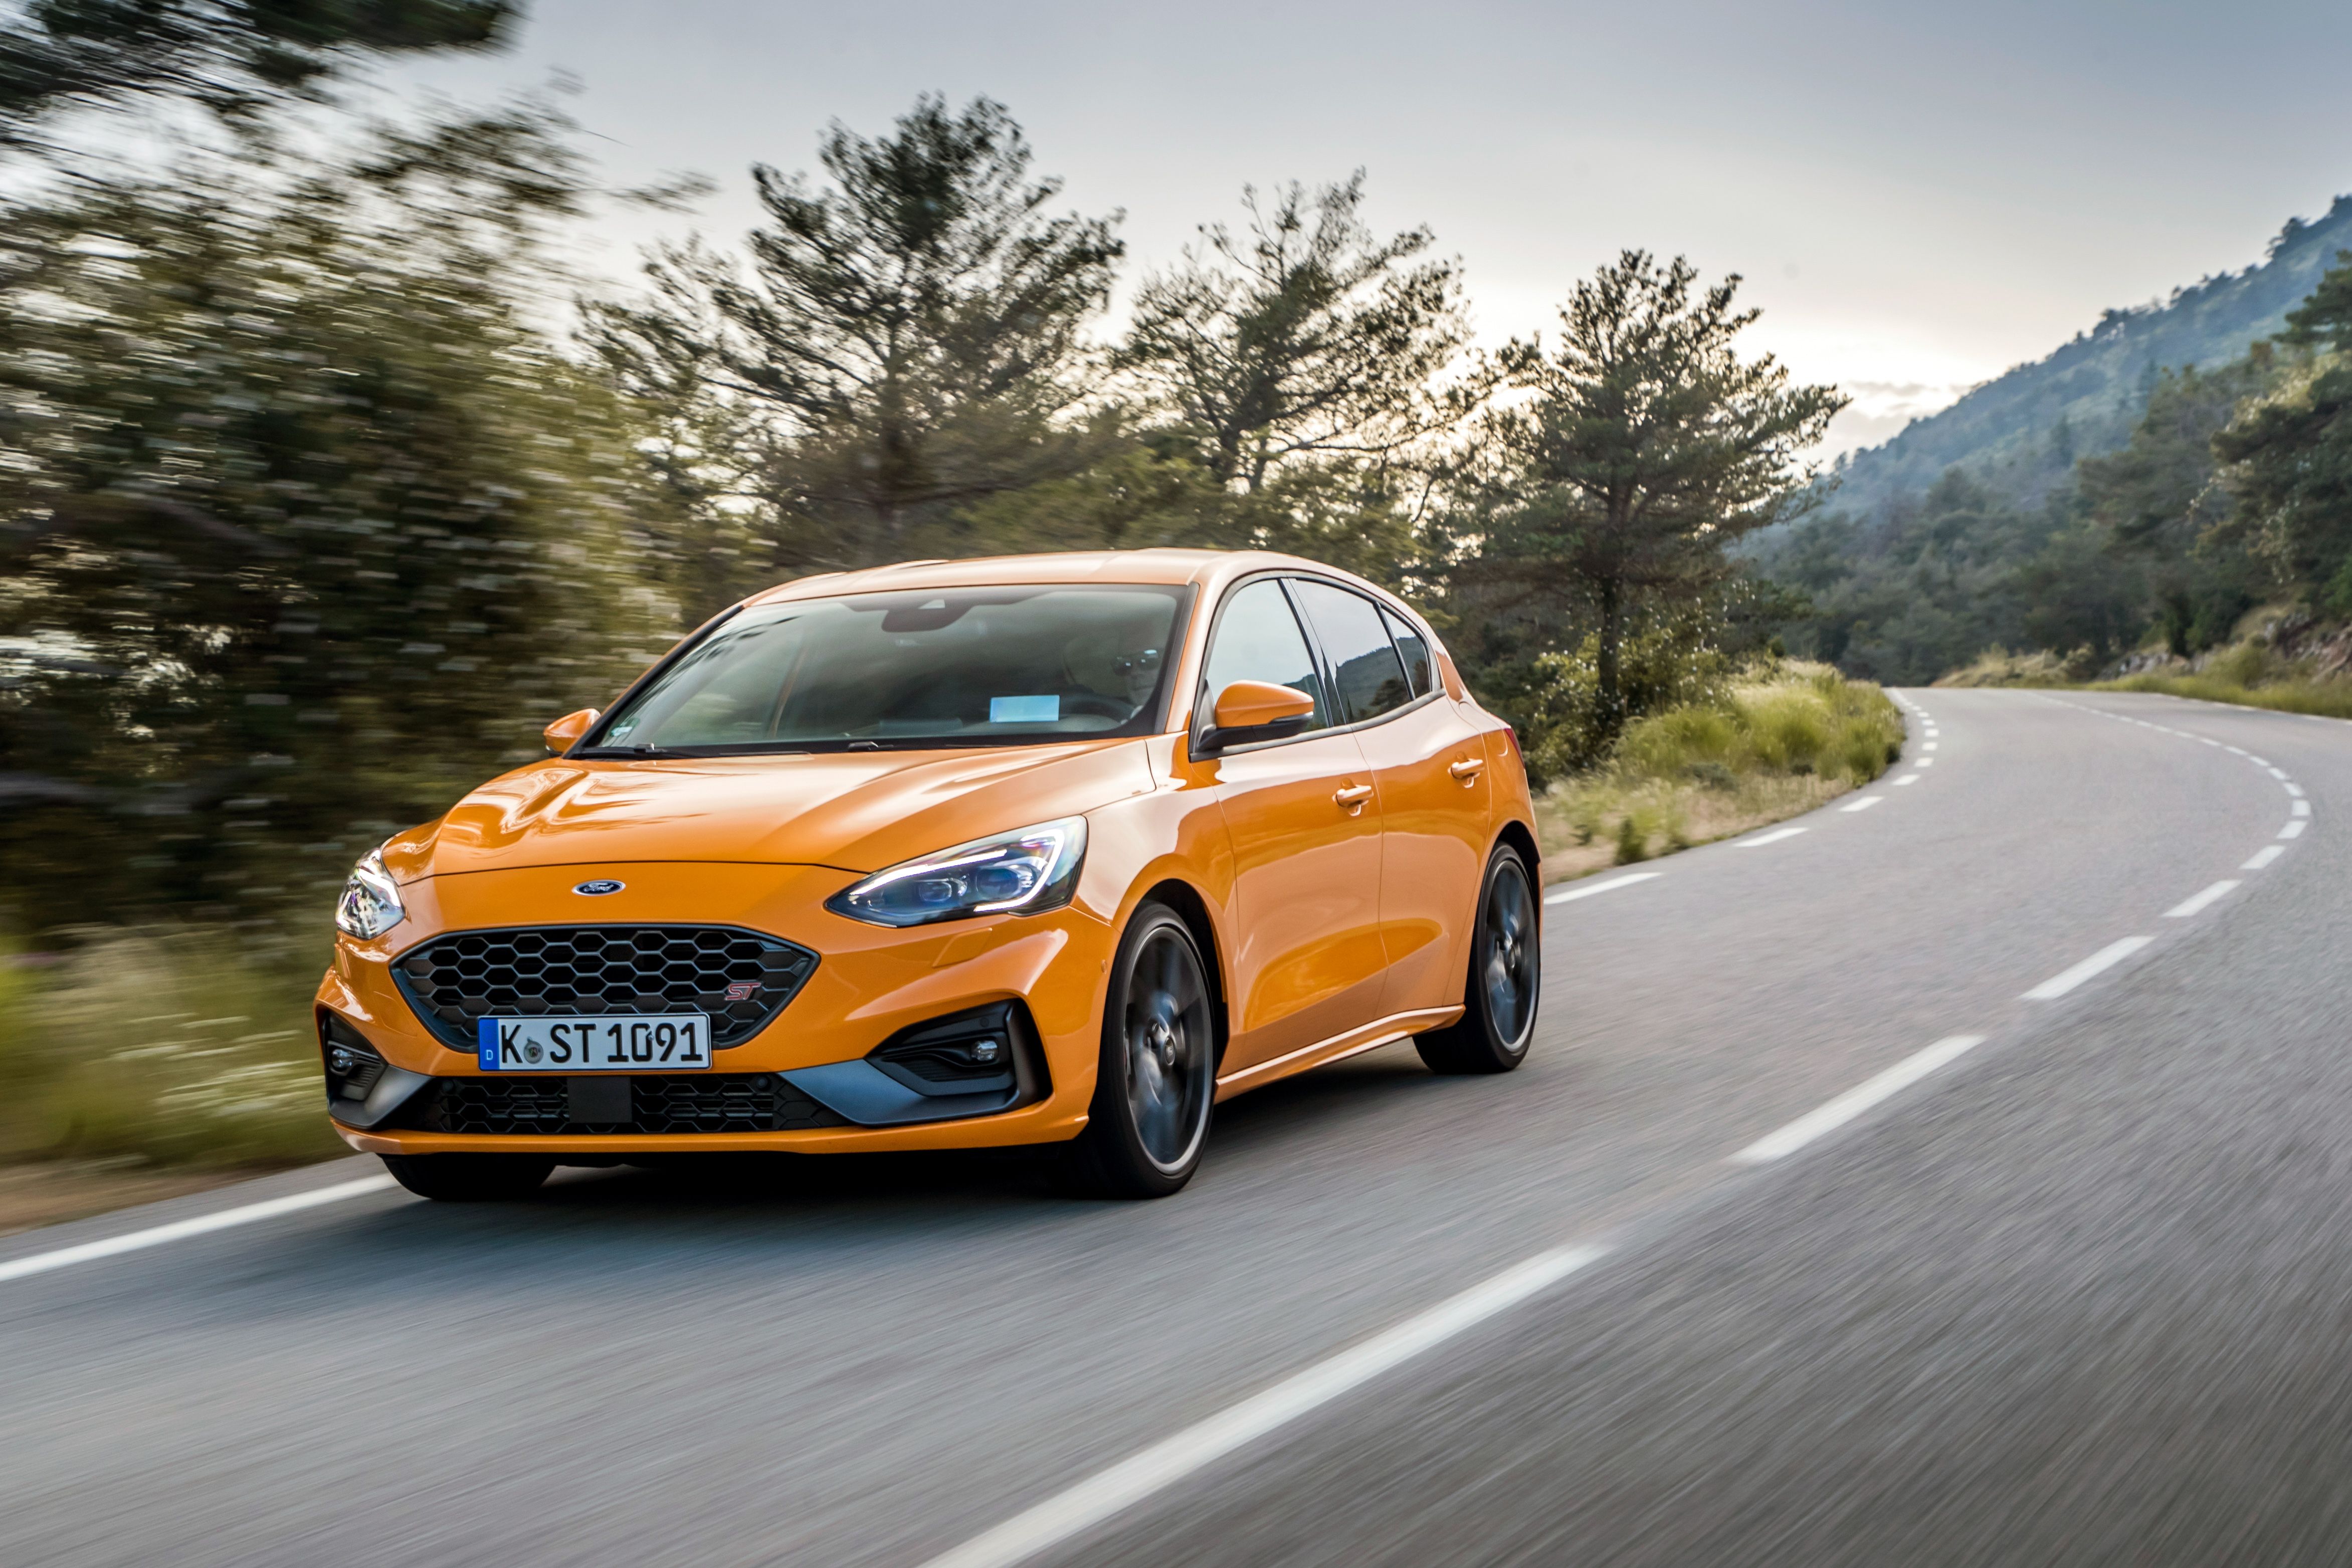 2019 Ford Focus ST Is a Brawny Front-Driver. Bring a Passport.